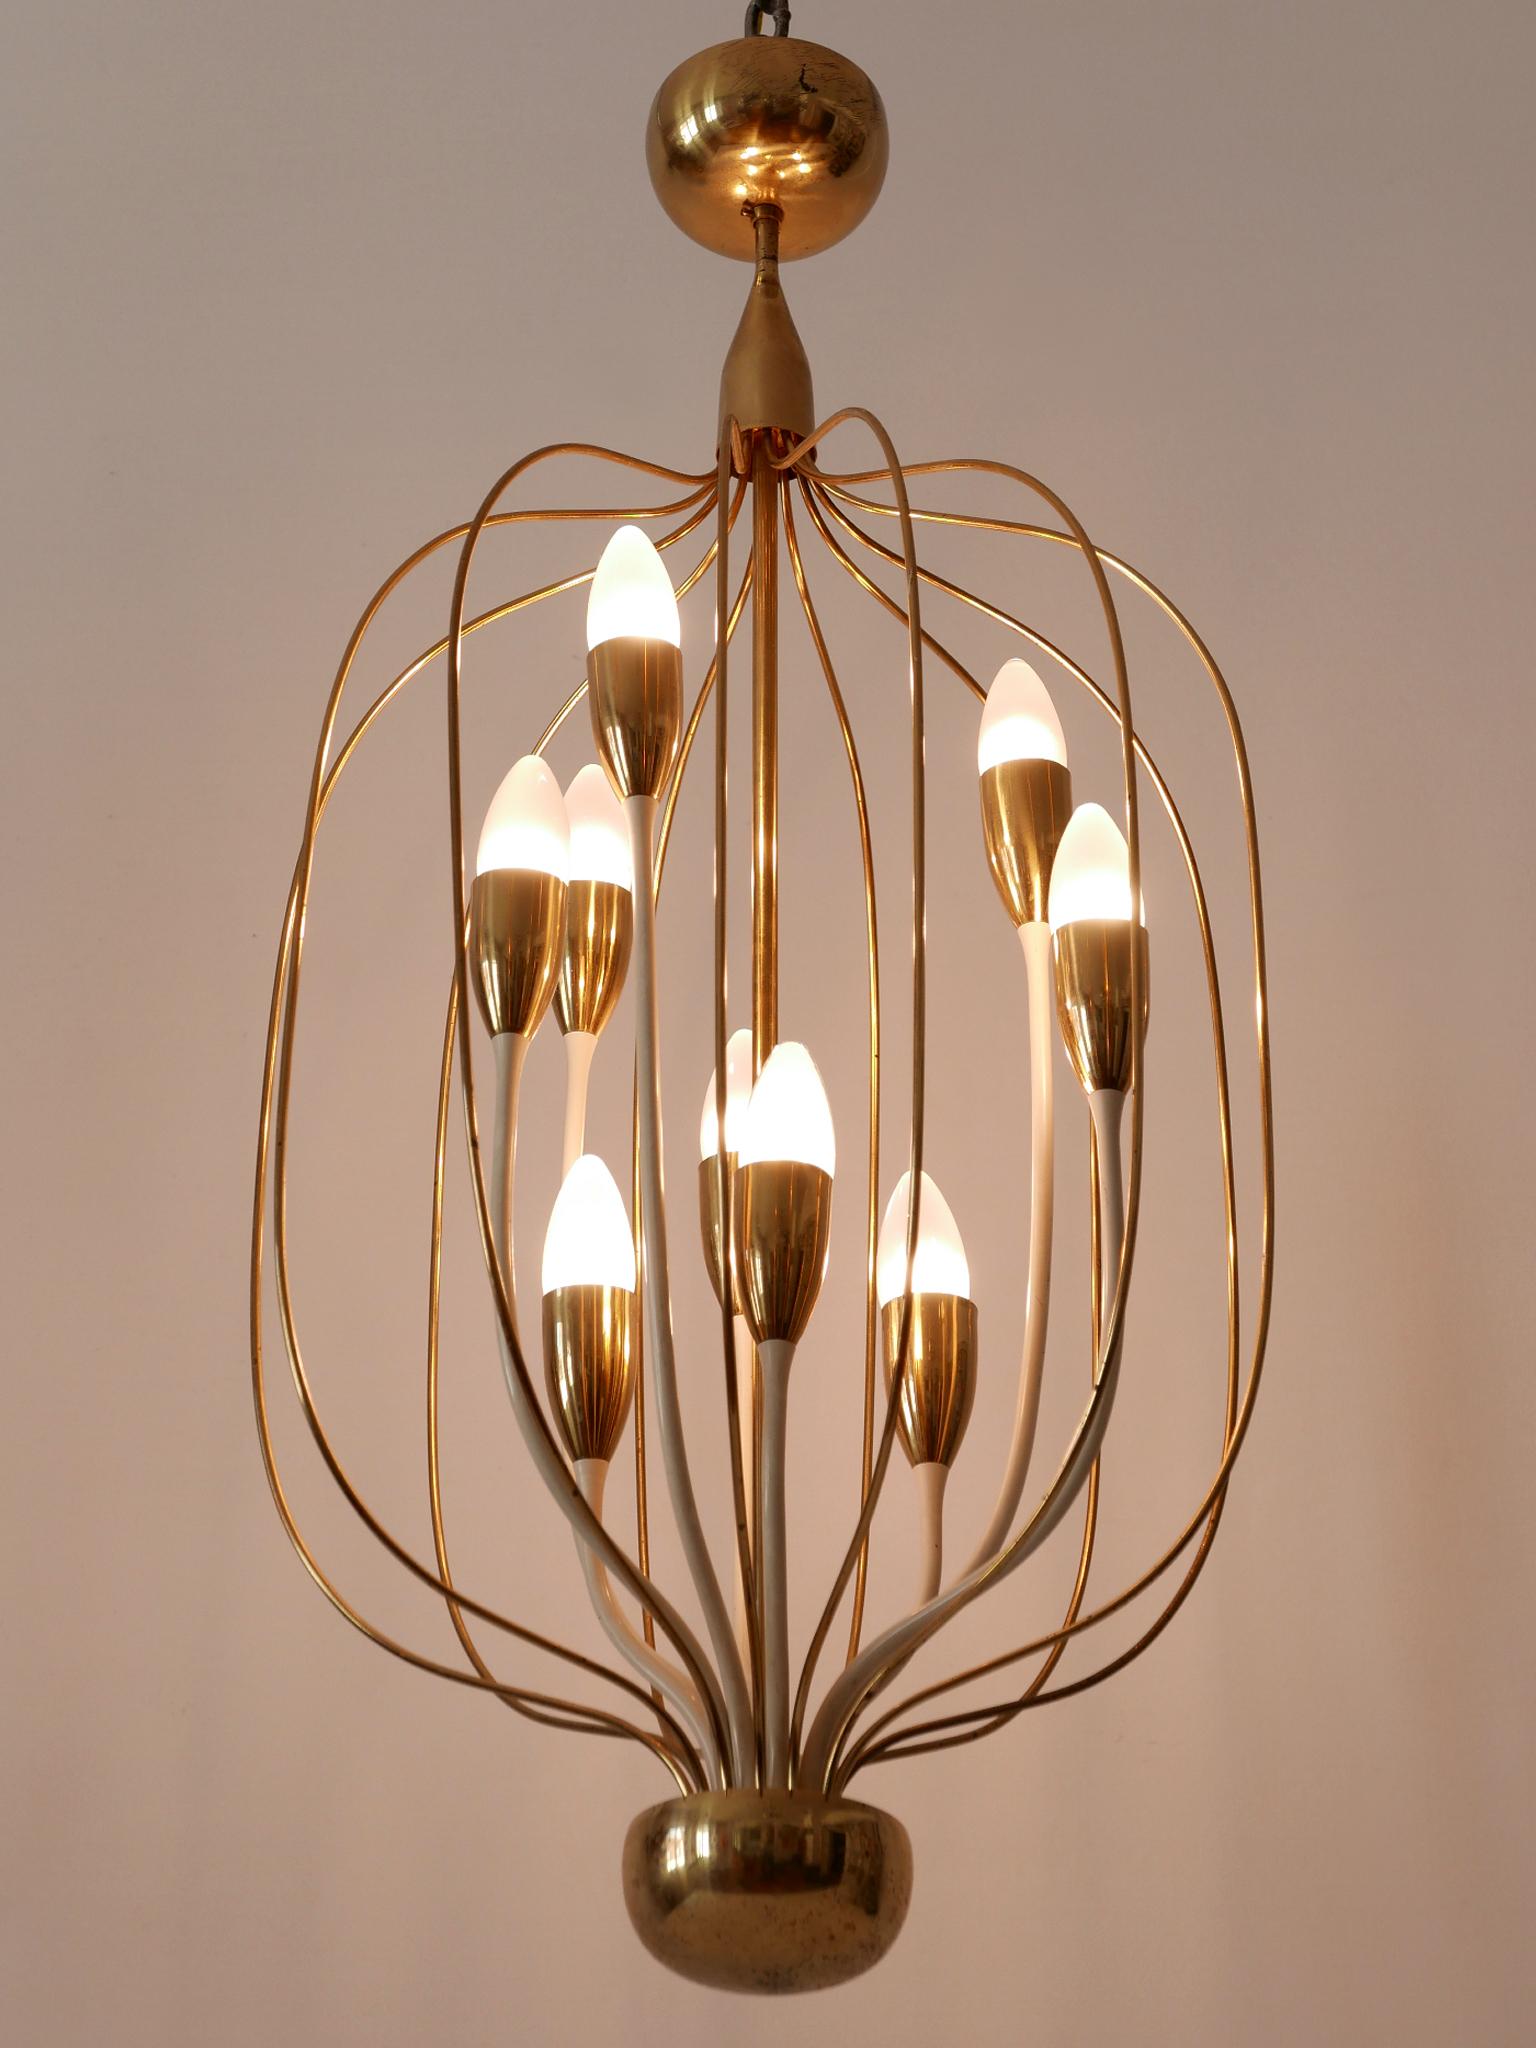 Exceptional Mid-Century Modern Nine-Flamed Chandelier or Pendant Lamp 1950s For Sale 4